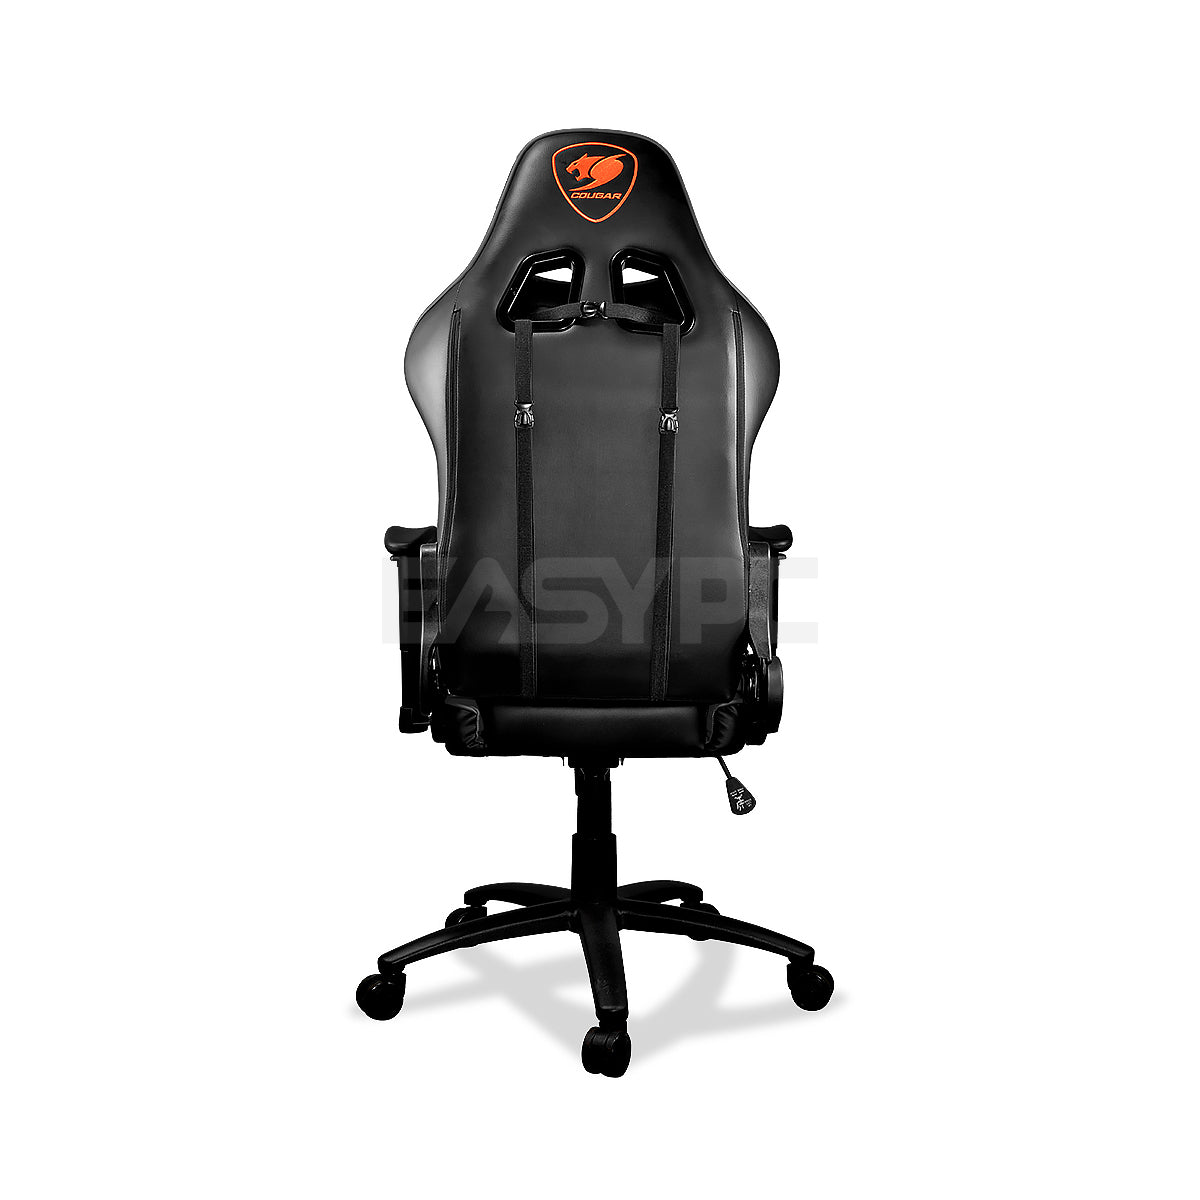 Cougar Armor One Gaming Chair Black-d